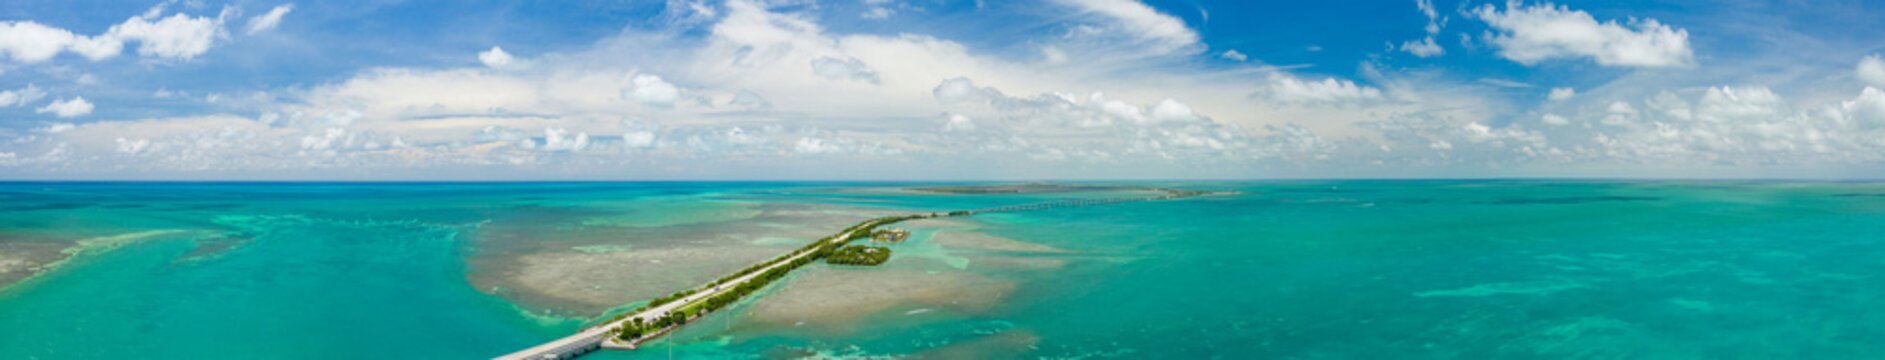 Florida Keys Overseas Highway aerial panorama saturated colors landscape photography